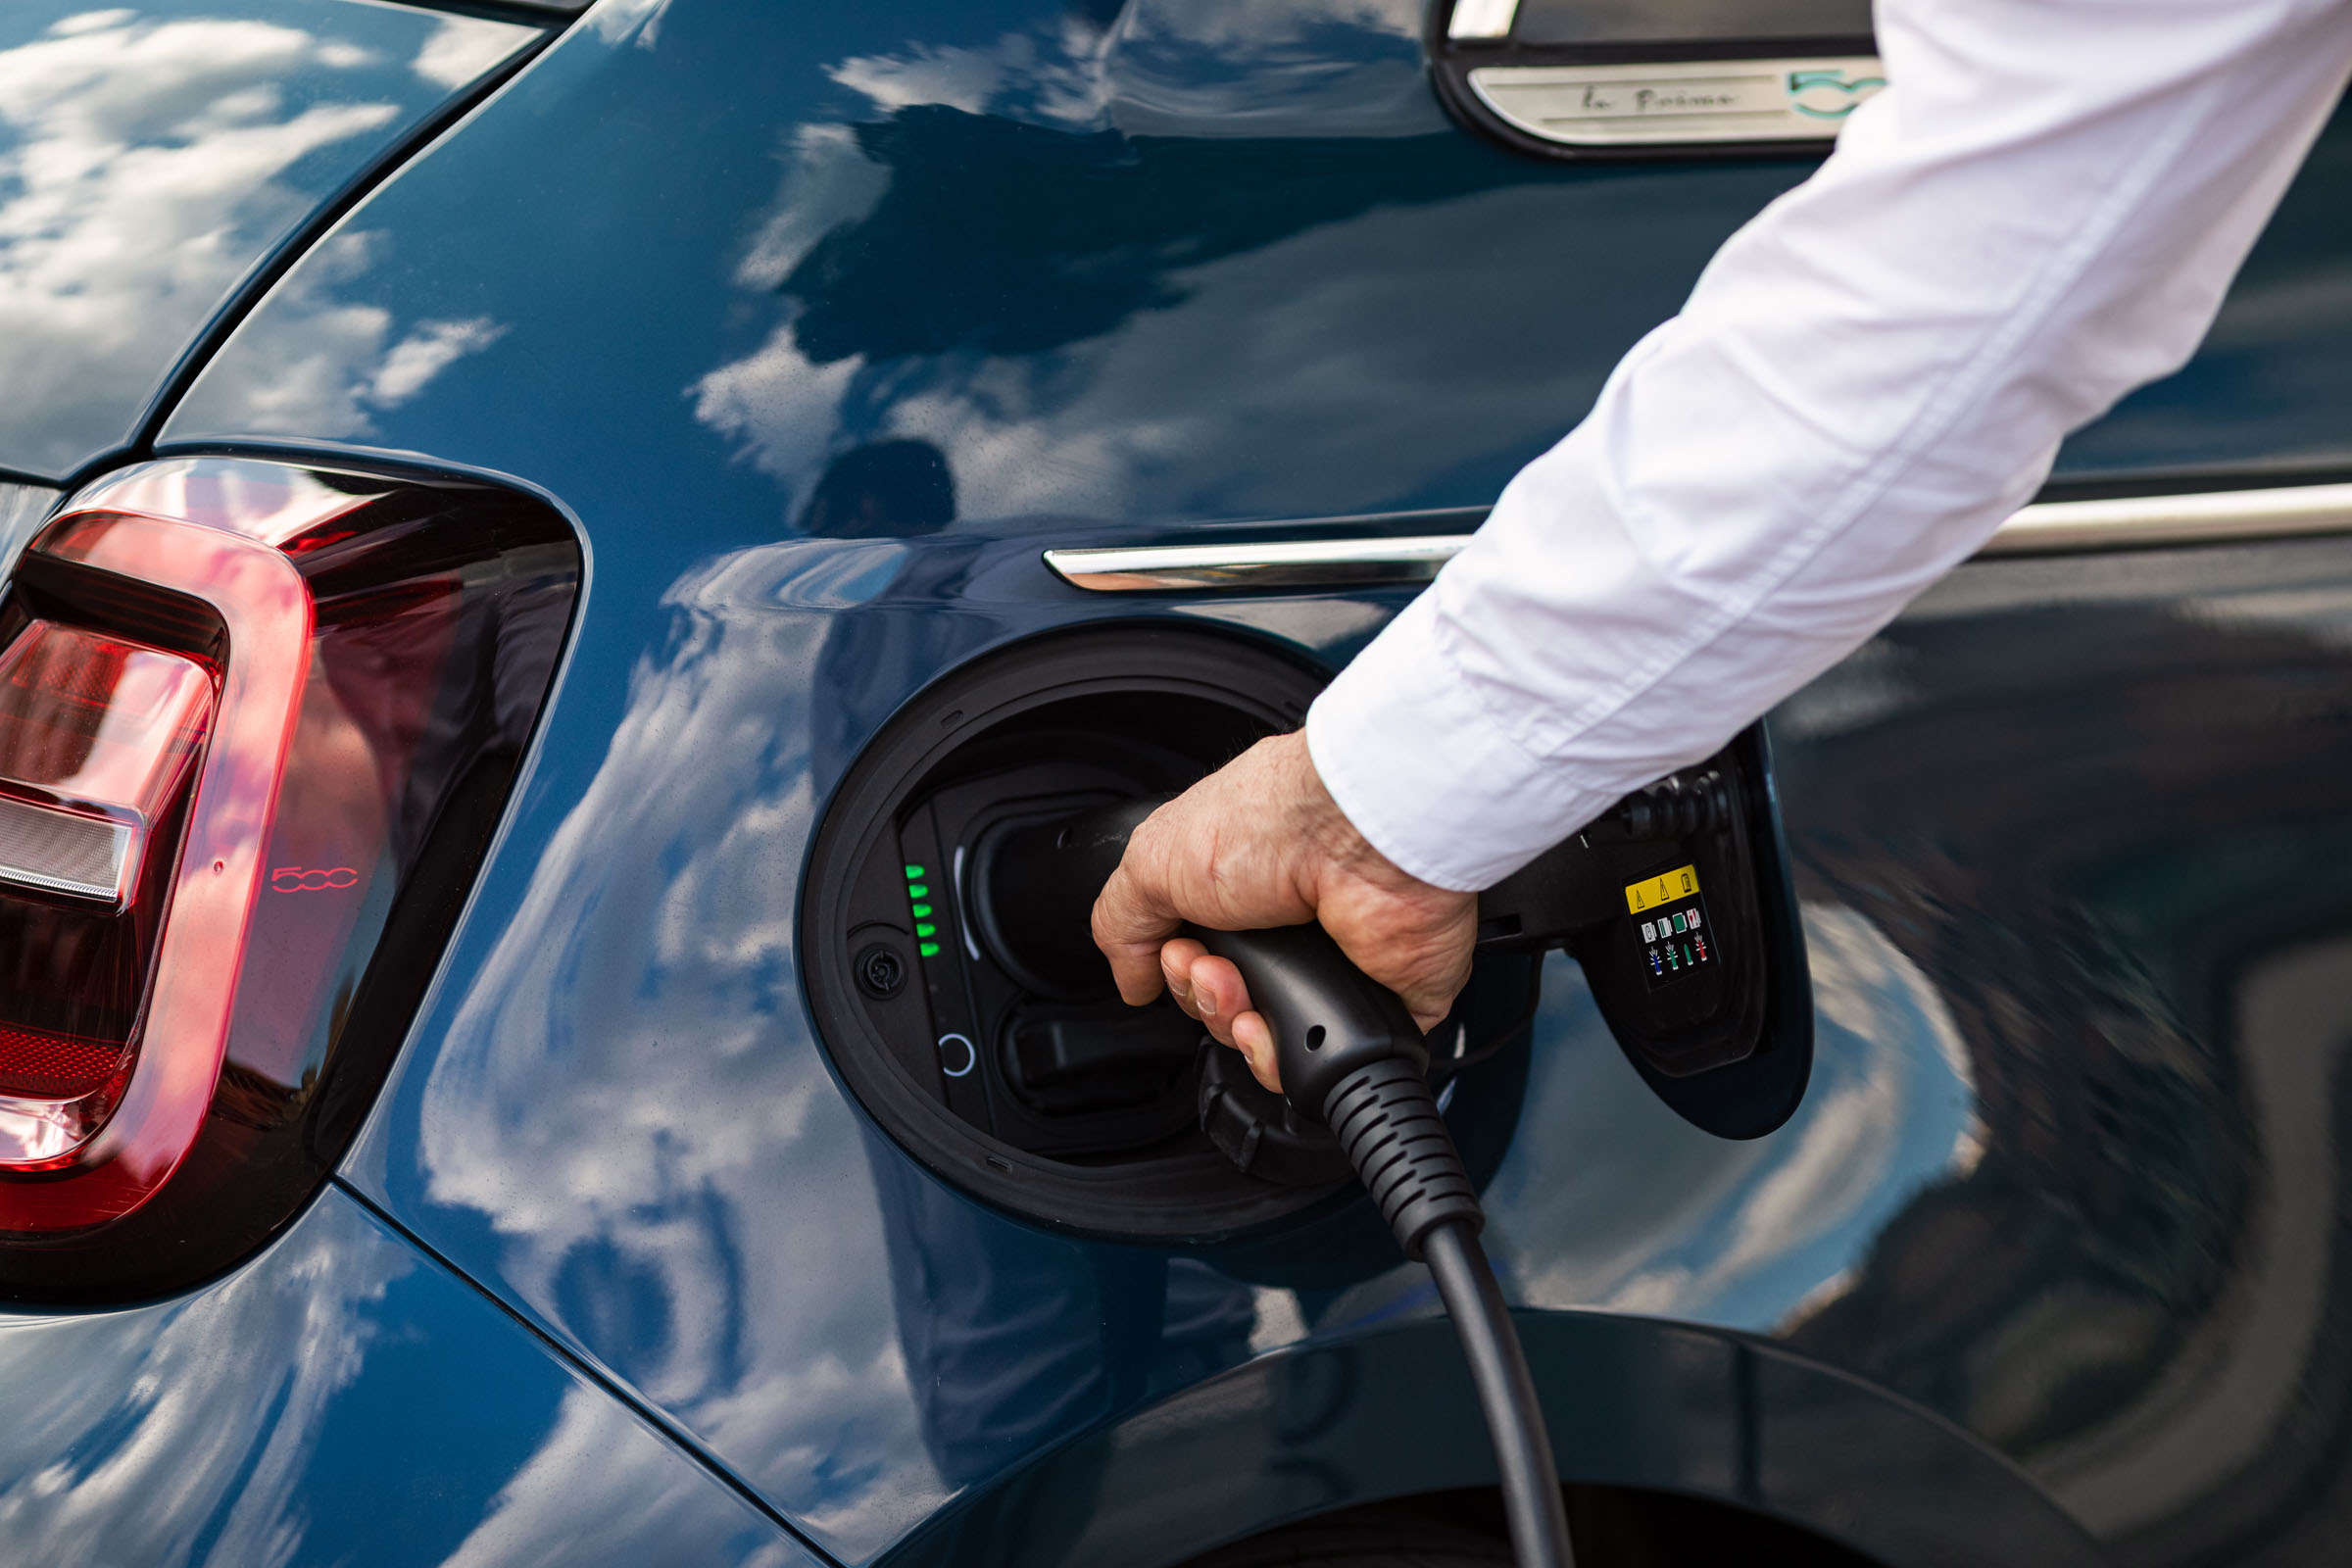 electric-car-incentives-and-subsidies-2020-scrappage-scheme-ruled-out